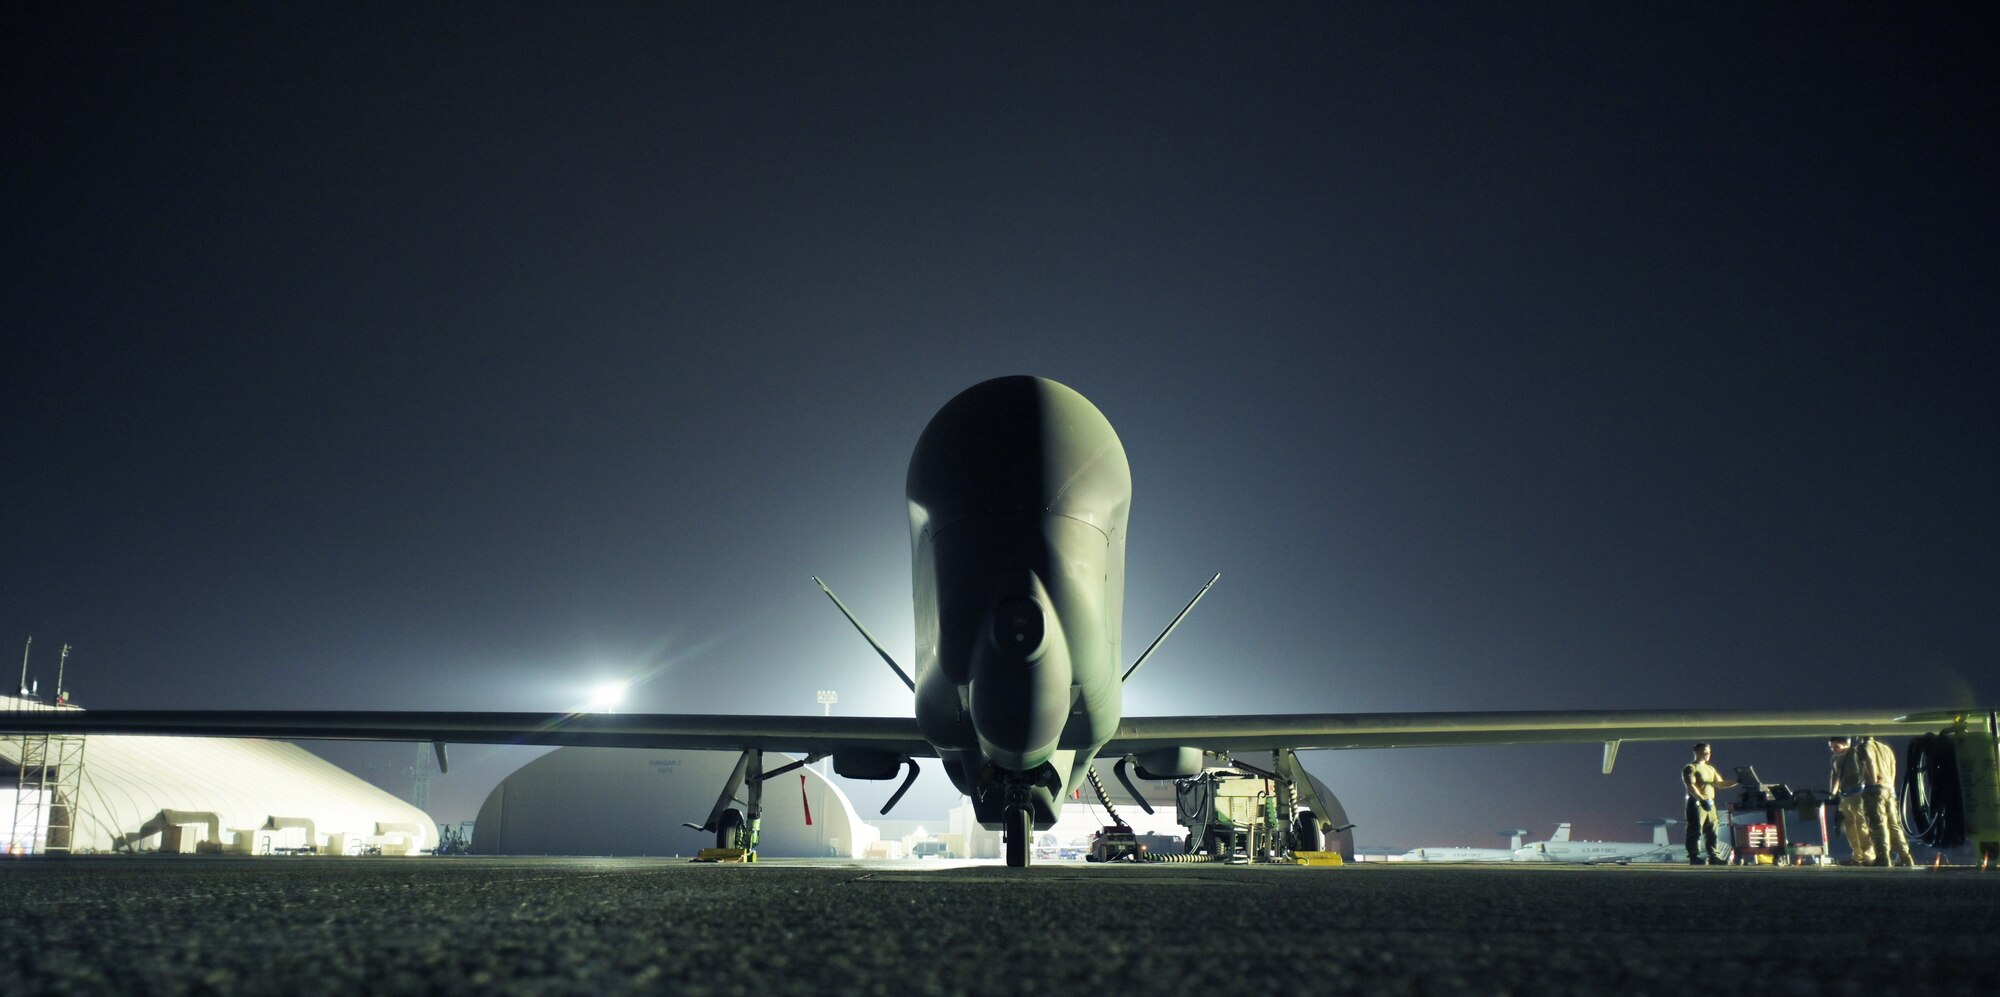 A U.S. Air Force Airmen from the 380th Expeditionary Aircraft Maintenance Squadron, prepare to launch an RQ-4 Global Hawk at Al Dhafra Air Base, United Arab Emirates, May 7, 2021, 2021. The Global Hawk’s mission is to provide a broad spectrum of intelligence, surveillance, and reconnaissance capabilities to support joint combatant forces. (U.S. Air Force photo by Staff Sgt. Jao'Torey Johnson)